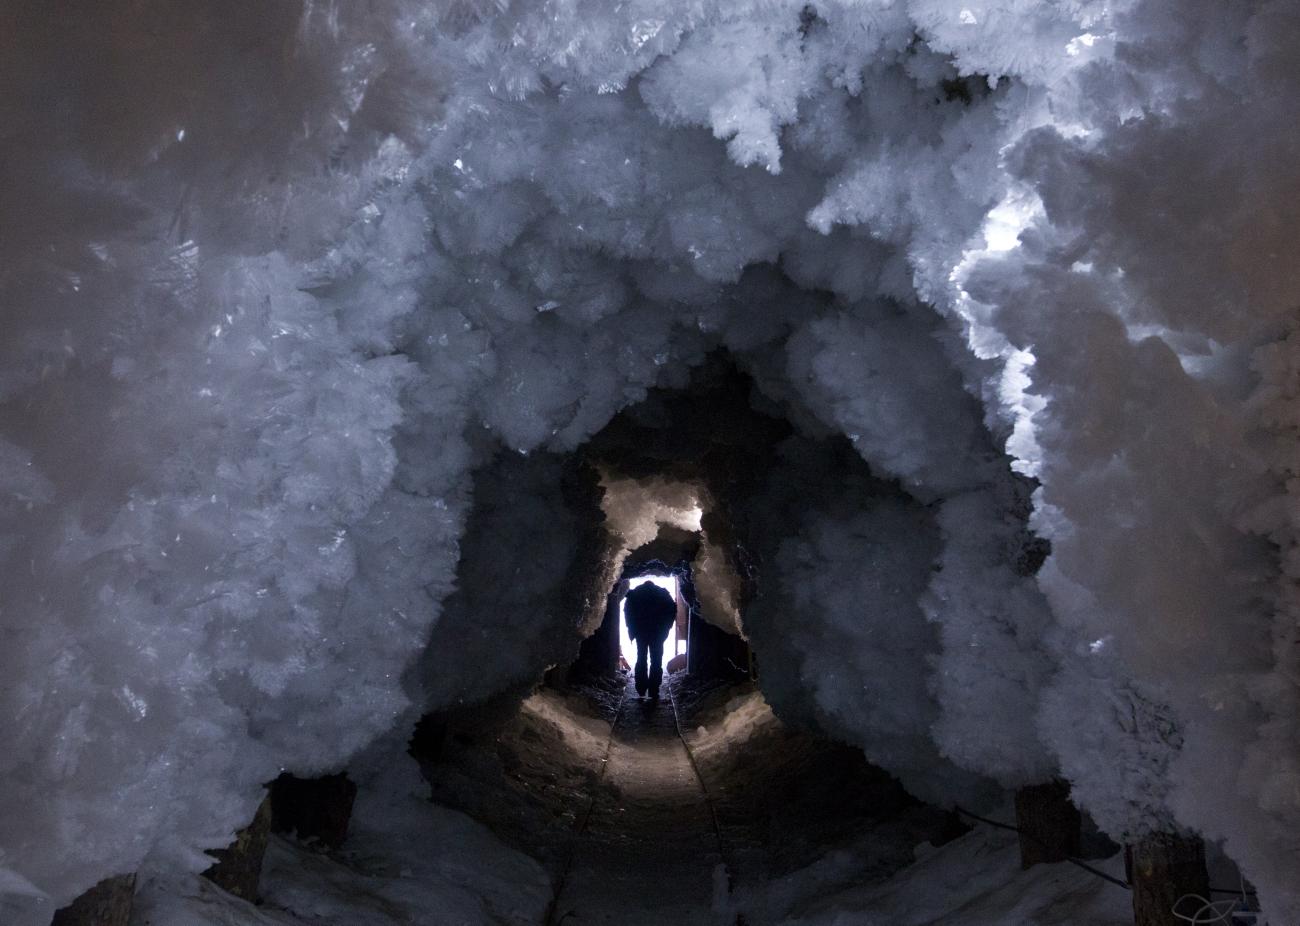 A man walks through a tunnel in permafrost covered with ice crystals